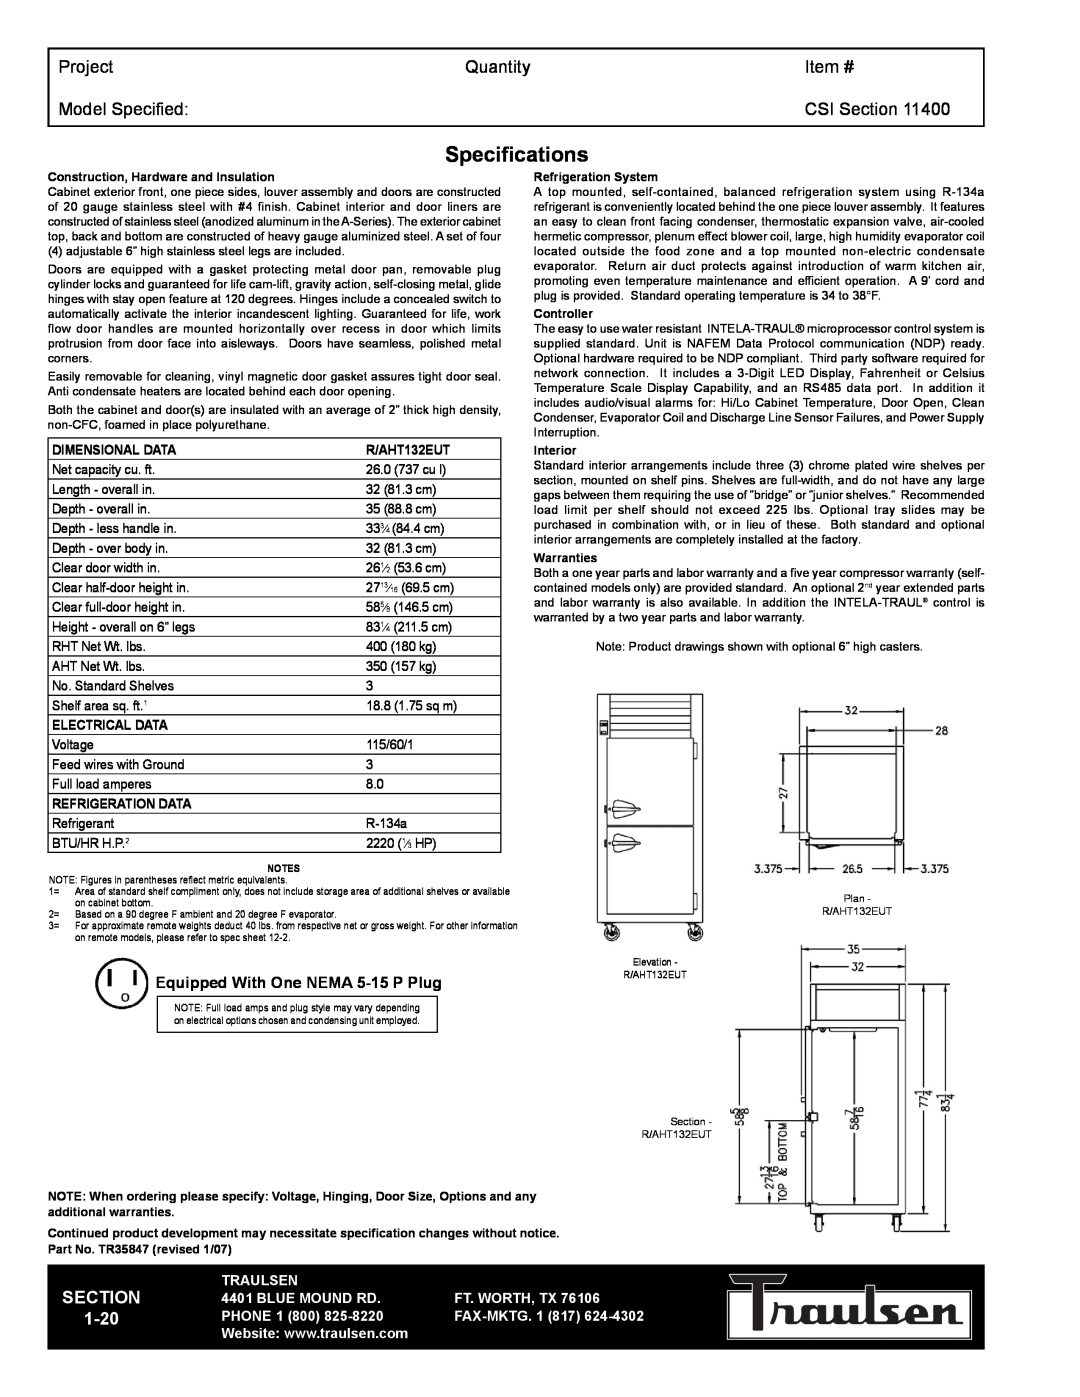 Traulsen RHT132EUT-FHS Specifications, Project, Quantity, Item #, Model Specified, CSI Section, 1-20, Traulsen, Phone 